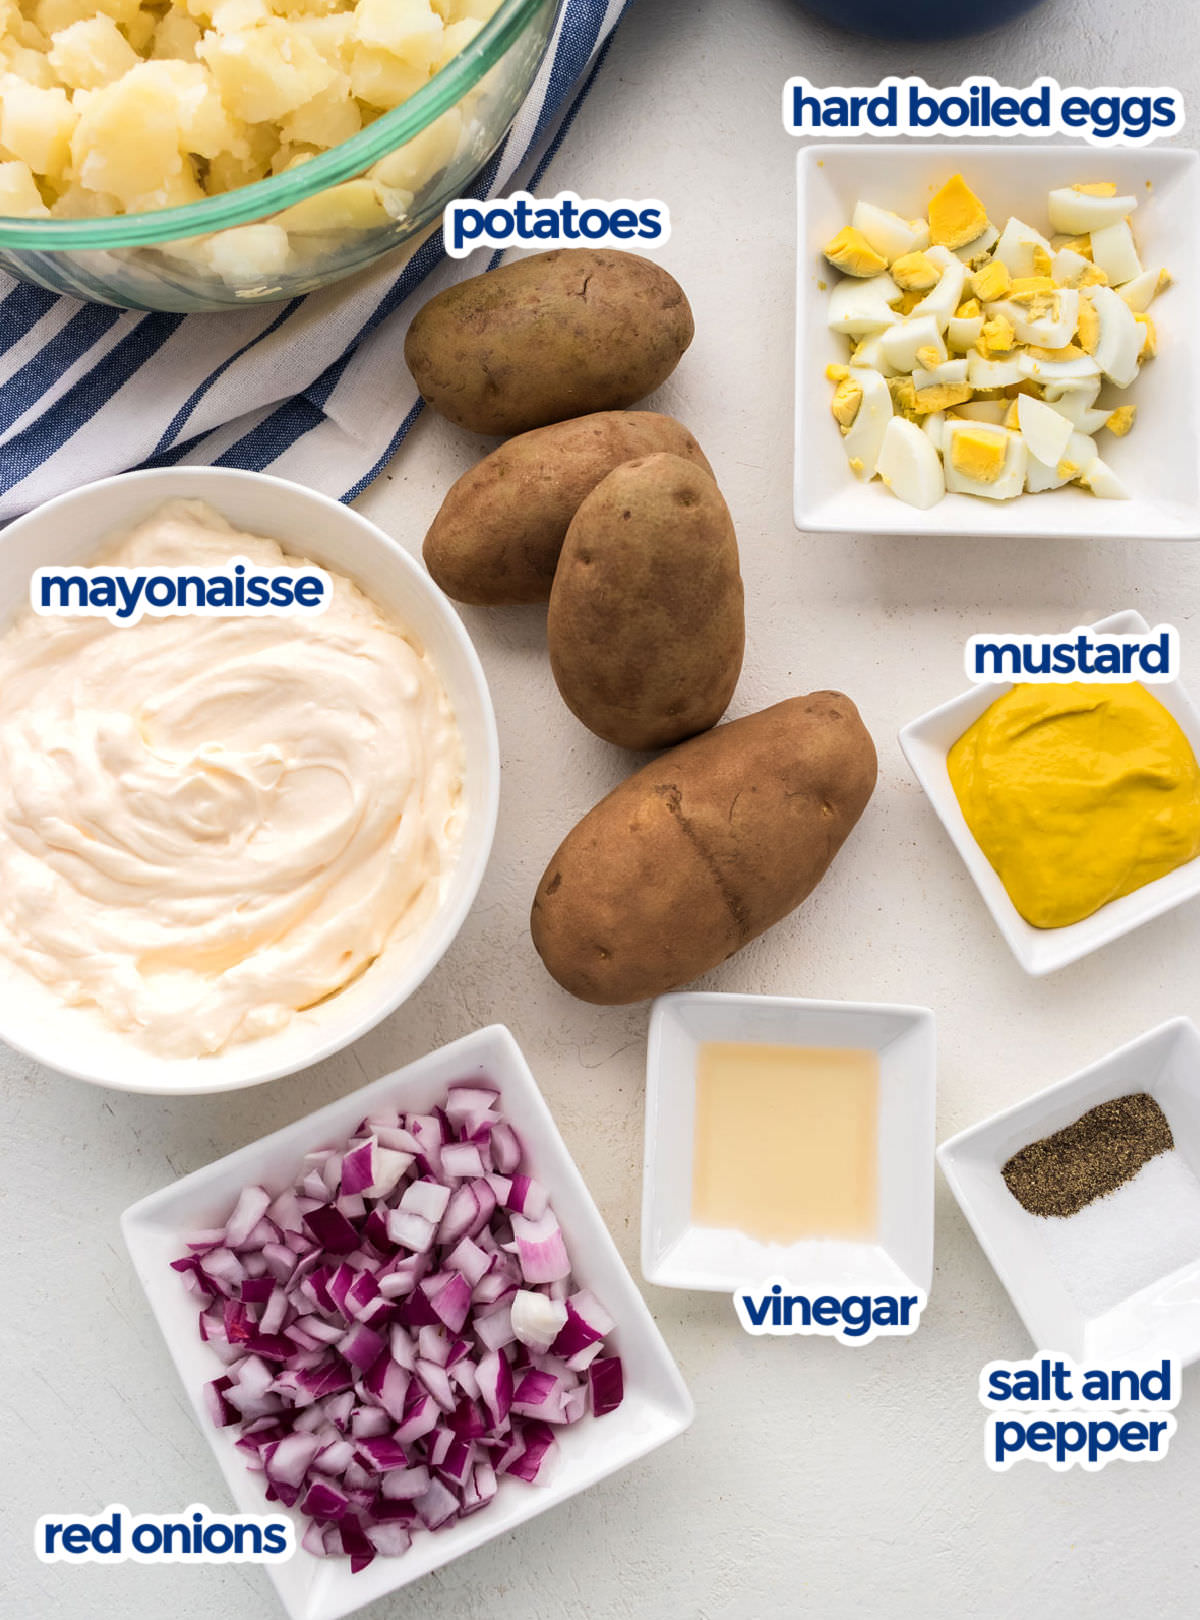 All the ingredients you will need to make Classic Potato Salad including potatoes, hard boiled eggs, mayonnaise, mustard, vinegar and red onions.